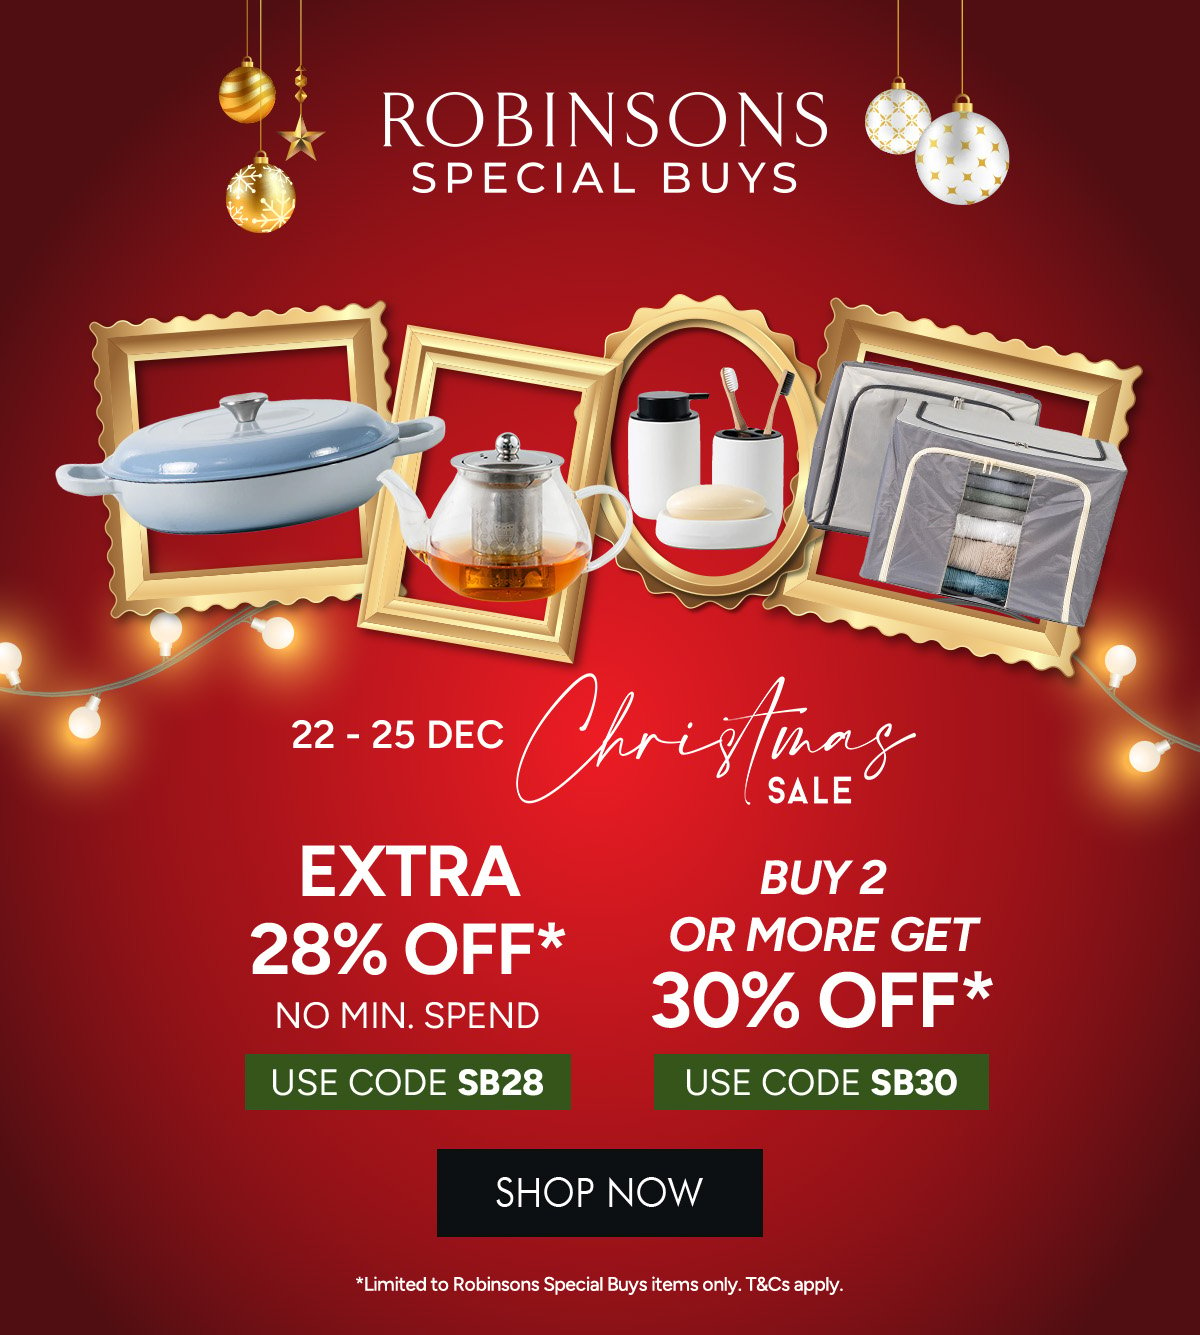 Robinsons Special Buys Christmas Sale